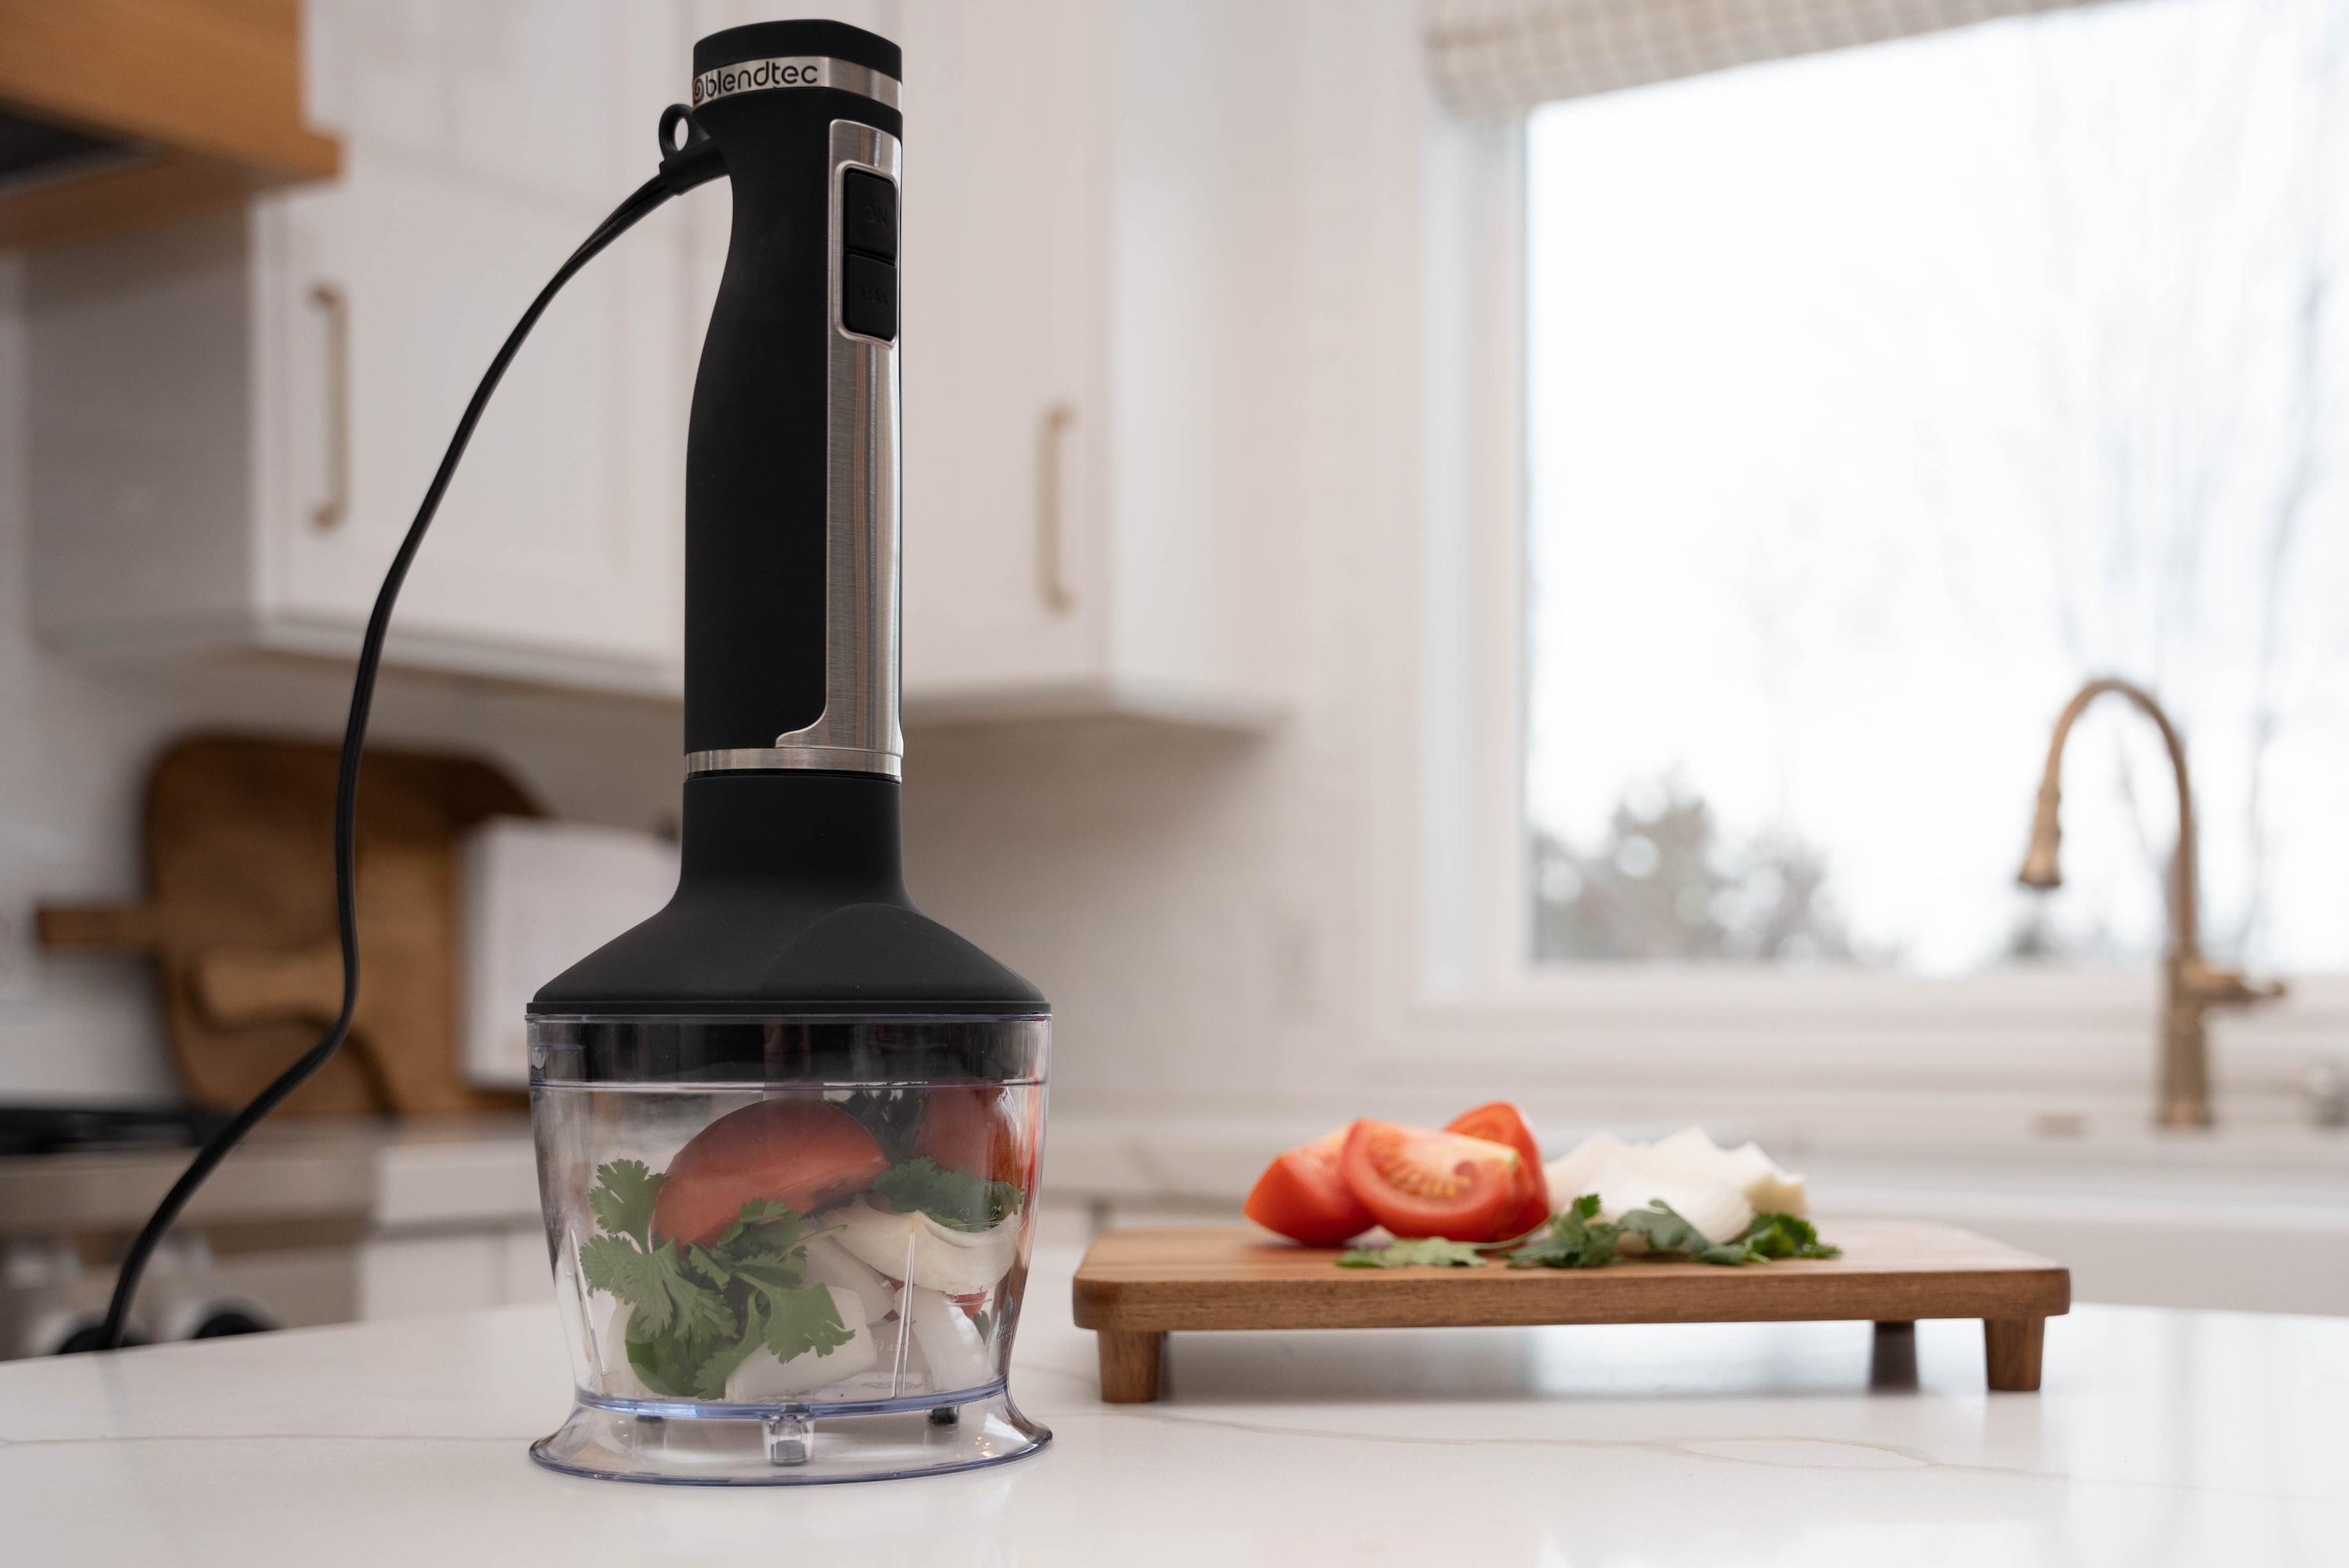 Blendtec - Immersion Hand Blender - Blender, Mixer and Food Processor - 3  in 1 Kitchen All Purpose Tool - Stainless Steel 